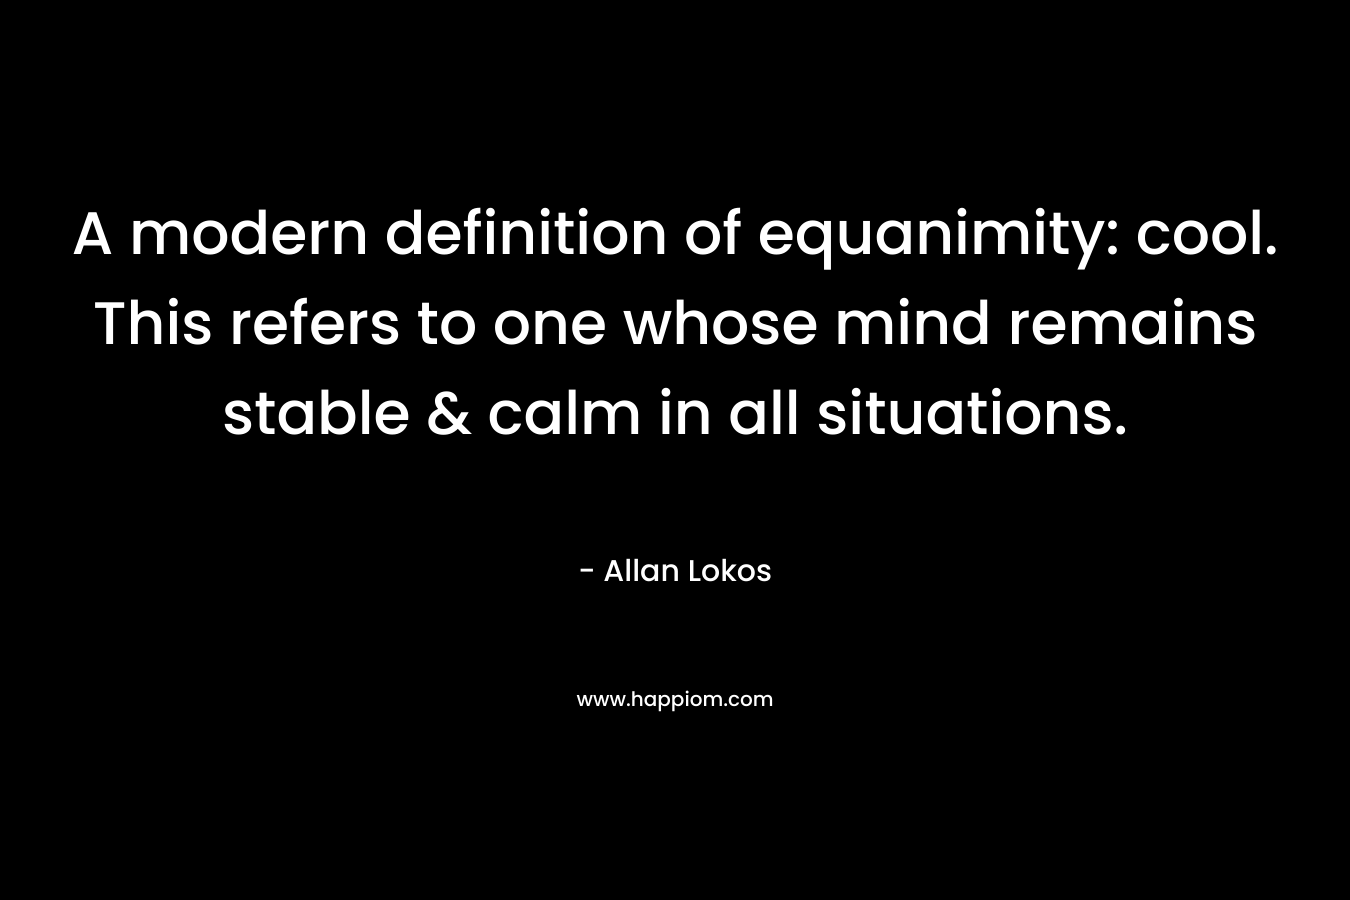 A modern definition of equanimity: cool. This refers to one whose mind remains stable & calm in all situations. – Allan Lokos